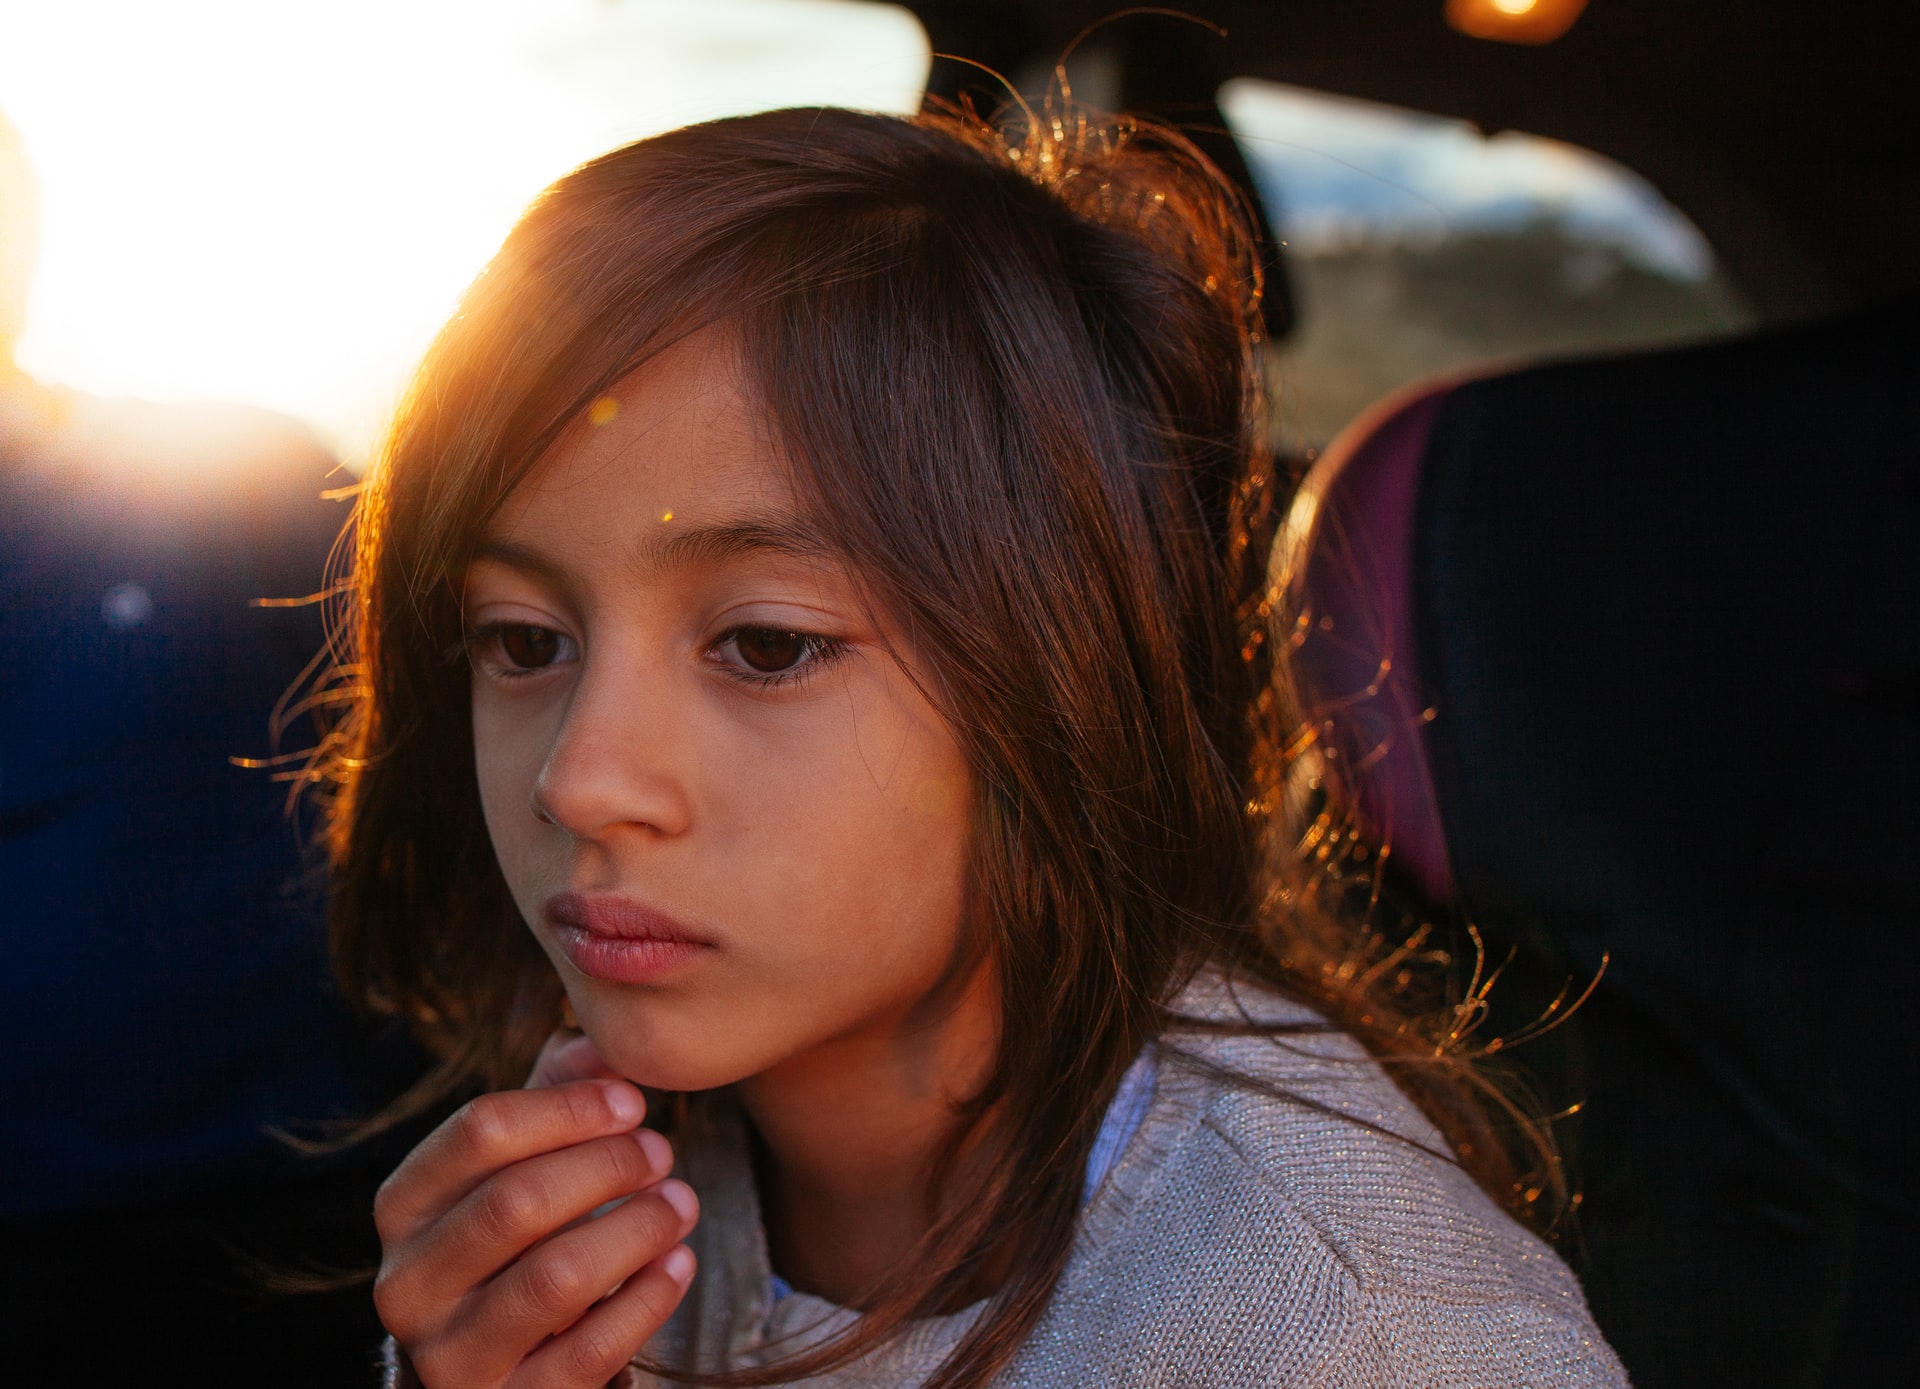 A child with long hair is sitting in a car seat, gazing thoughtfully out of the window. Warm sunlight illuminates the child's face from behind, casting a gentle glow and creating a serene atmosphere. The child's hand rests lightly against their chin, perhaps reflecting on experiences from Khiron Clinics.